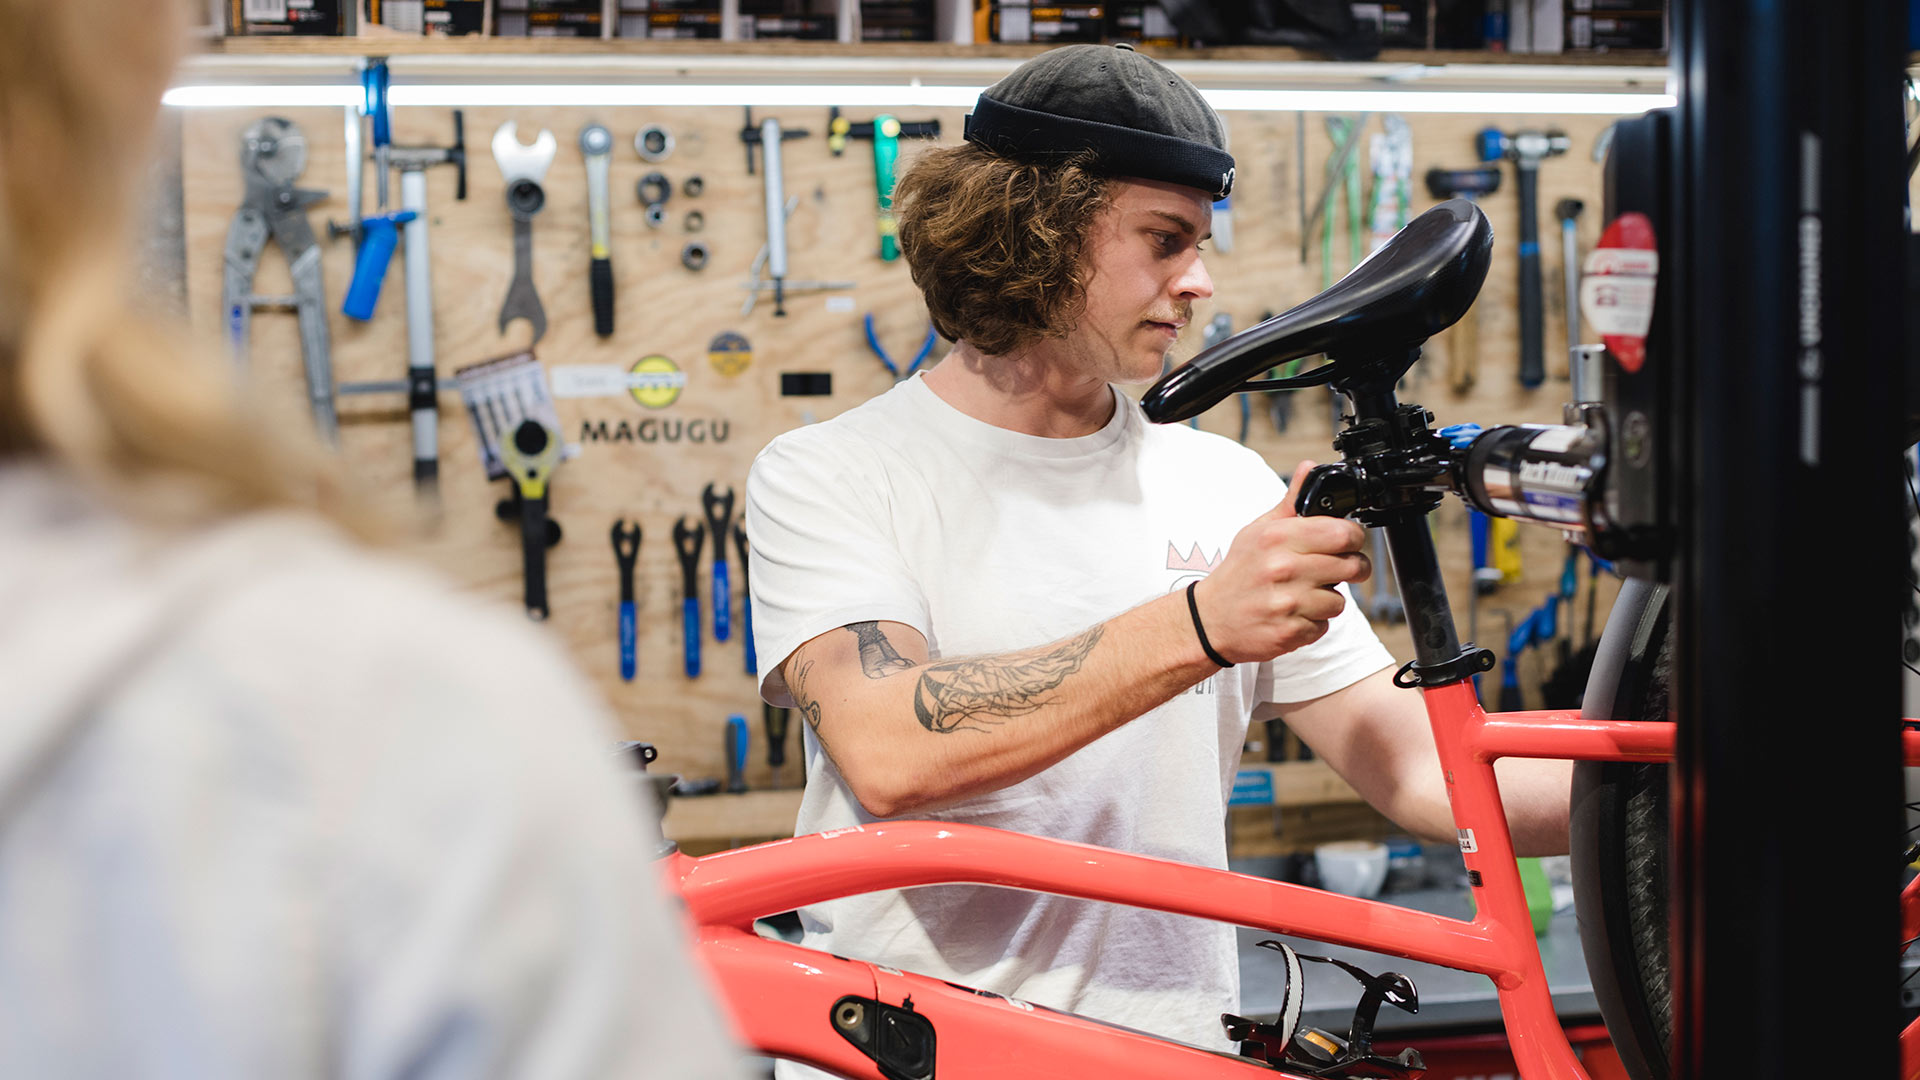 E-bike maintenance apps are designed to help you keep your e-bike perfectly maintained.